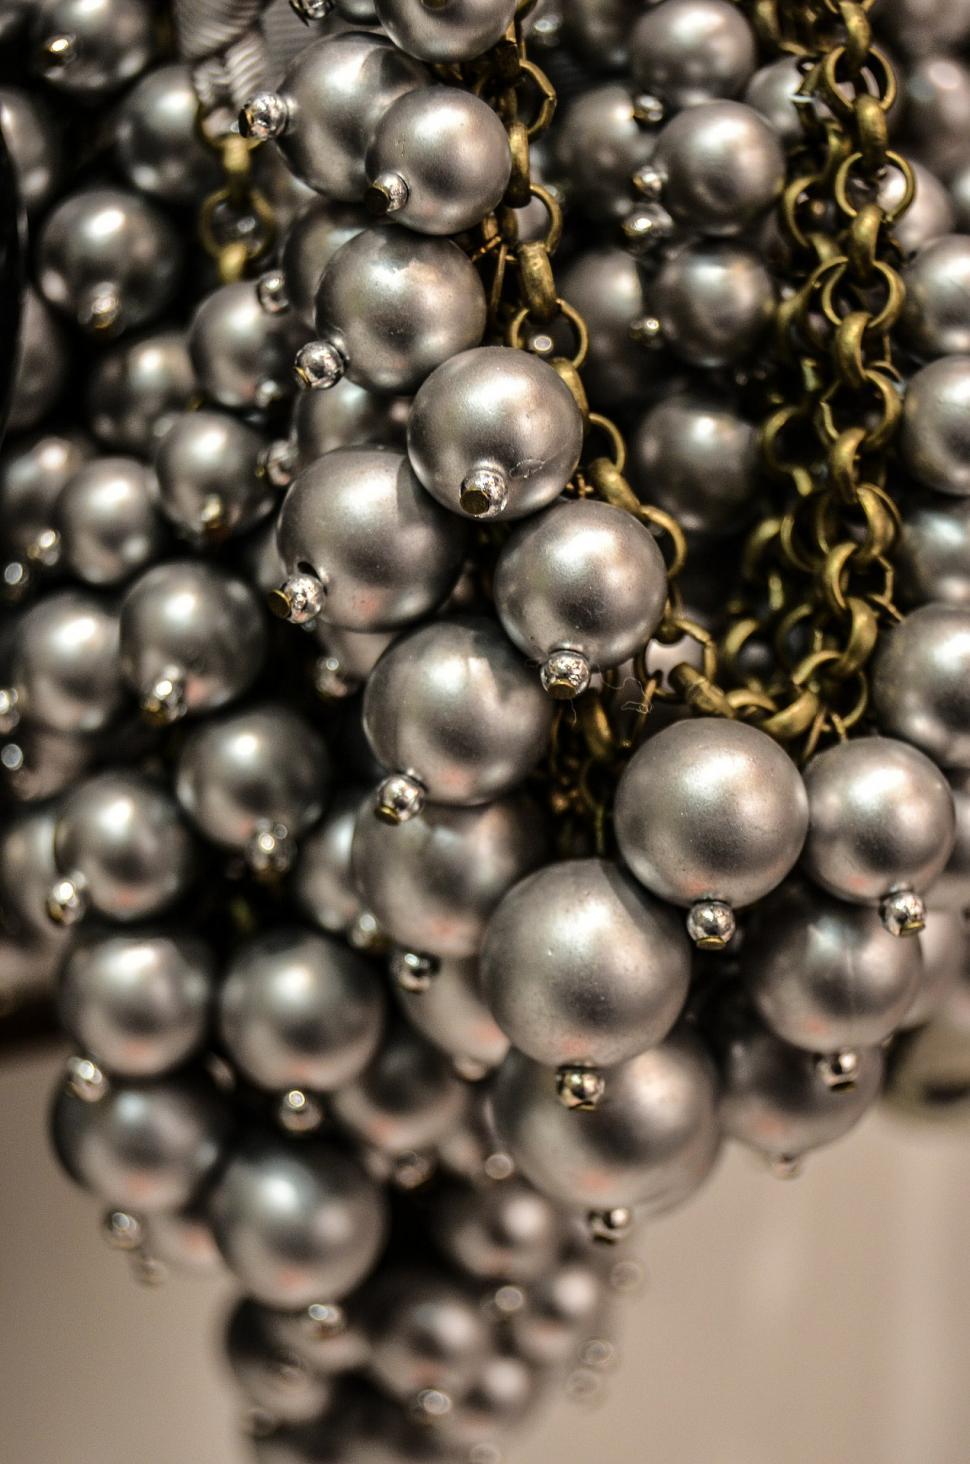 Free Image of Multiple Silver Balls Hanging From a Chain 